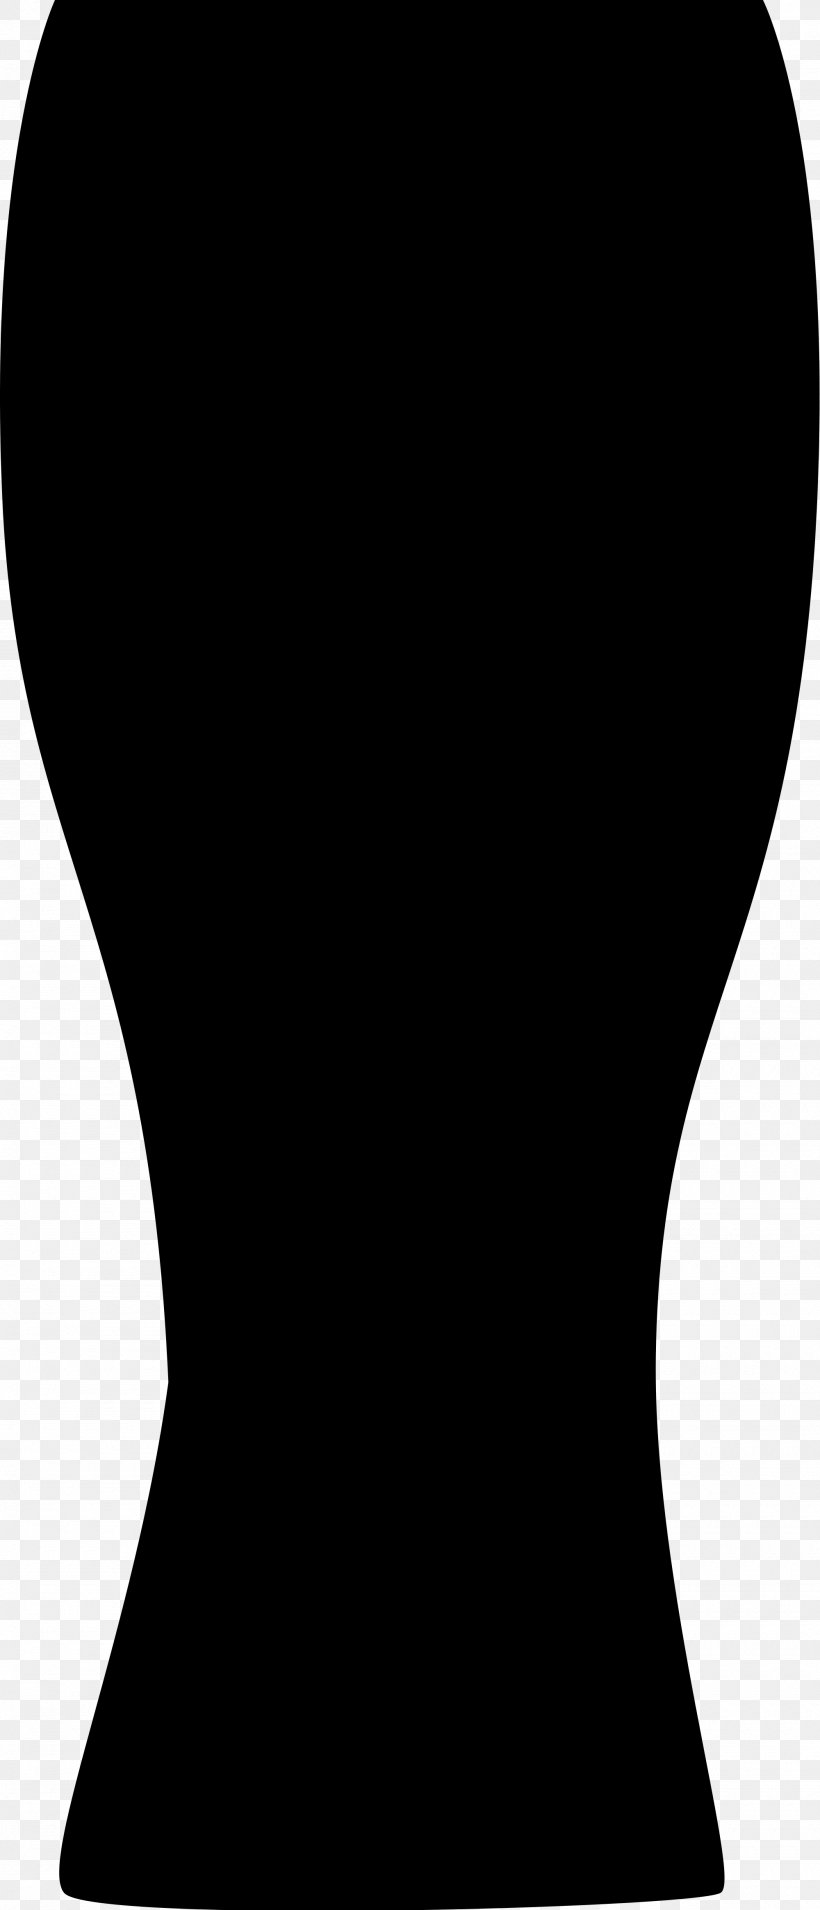 Wheat Beer Pilsner Beer Glasses Pint Glass, PNG, 2000x4660px, Beer, Beer Bottle, Beer Glasses, Black, Black And White Download Free